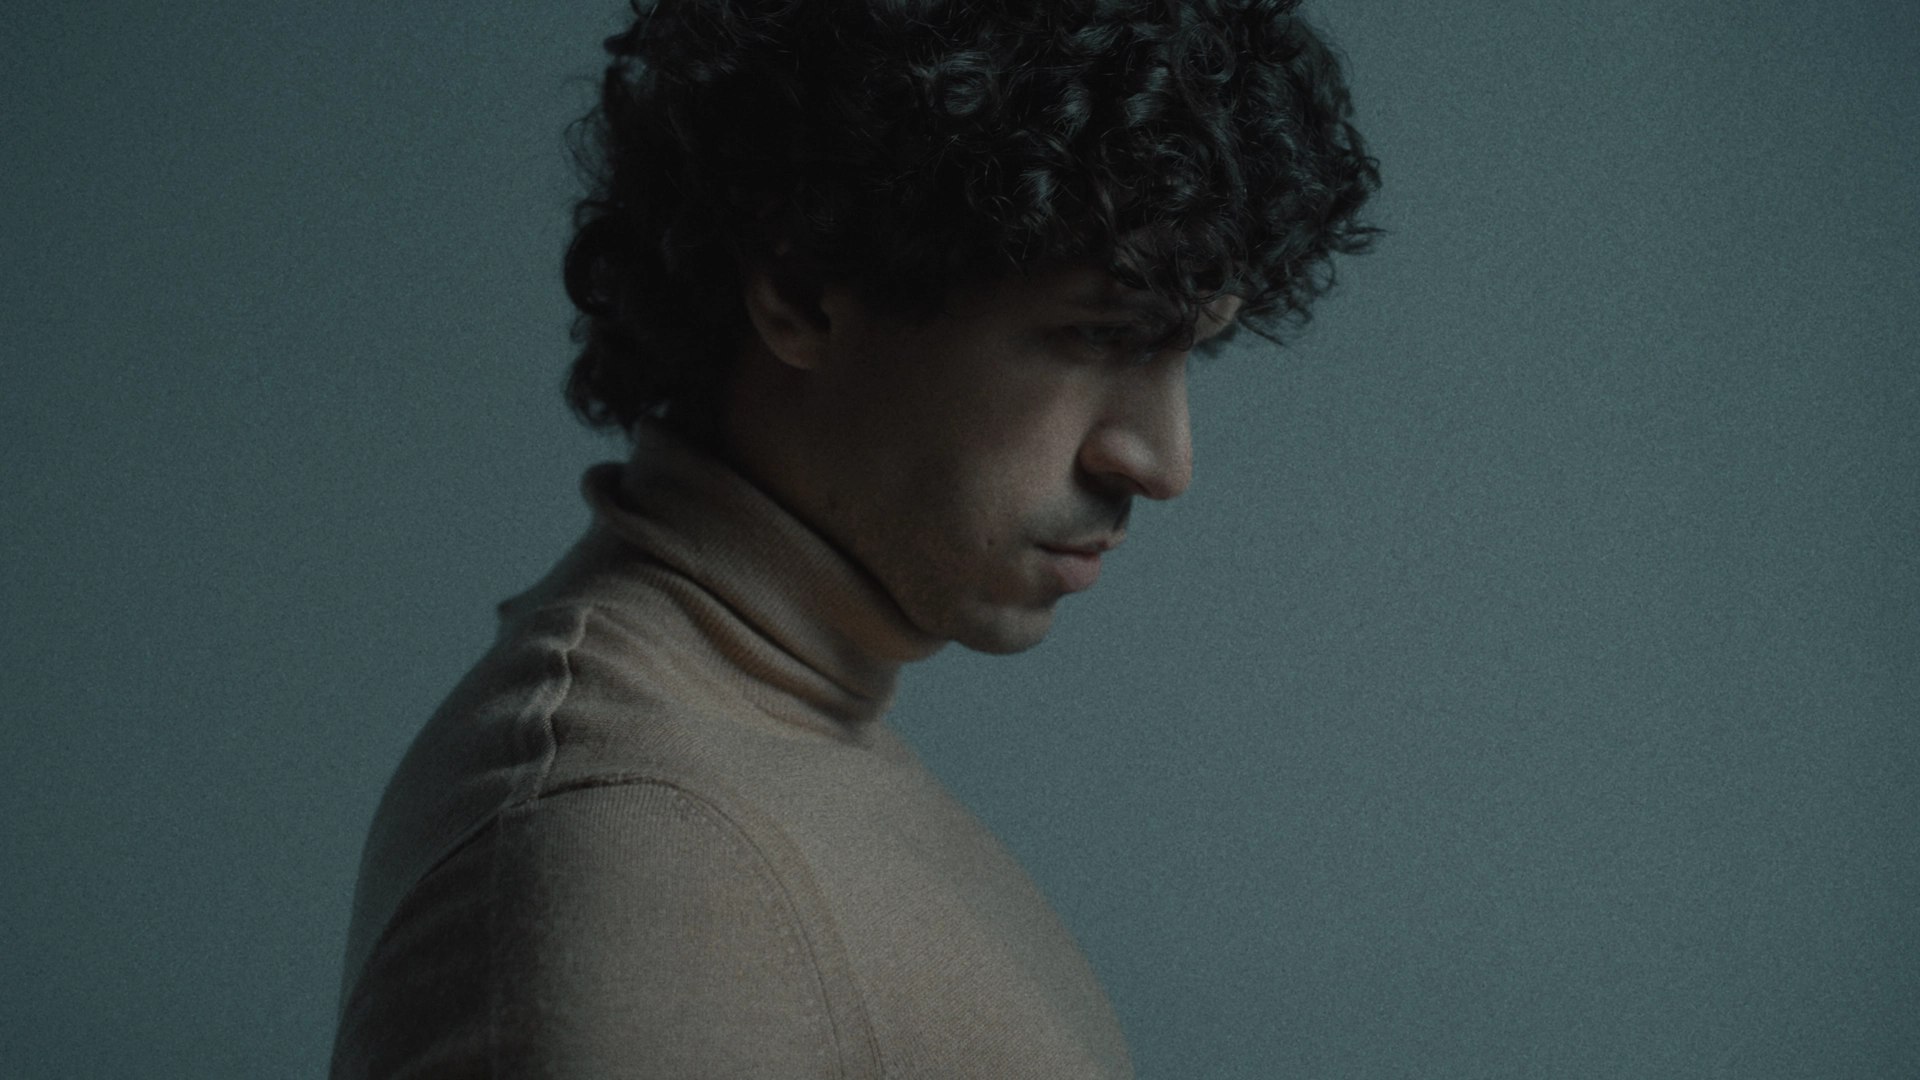 Side profile headshot of man with curly hair looking down